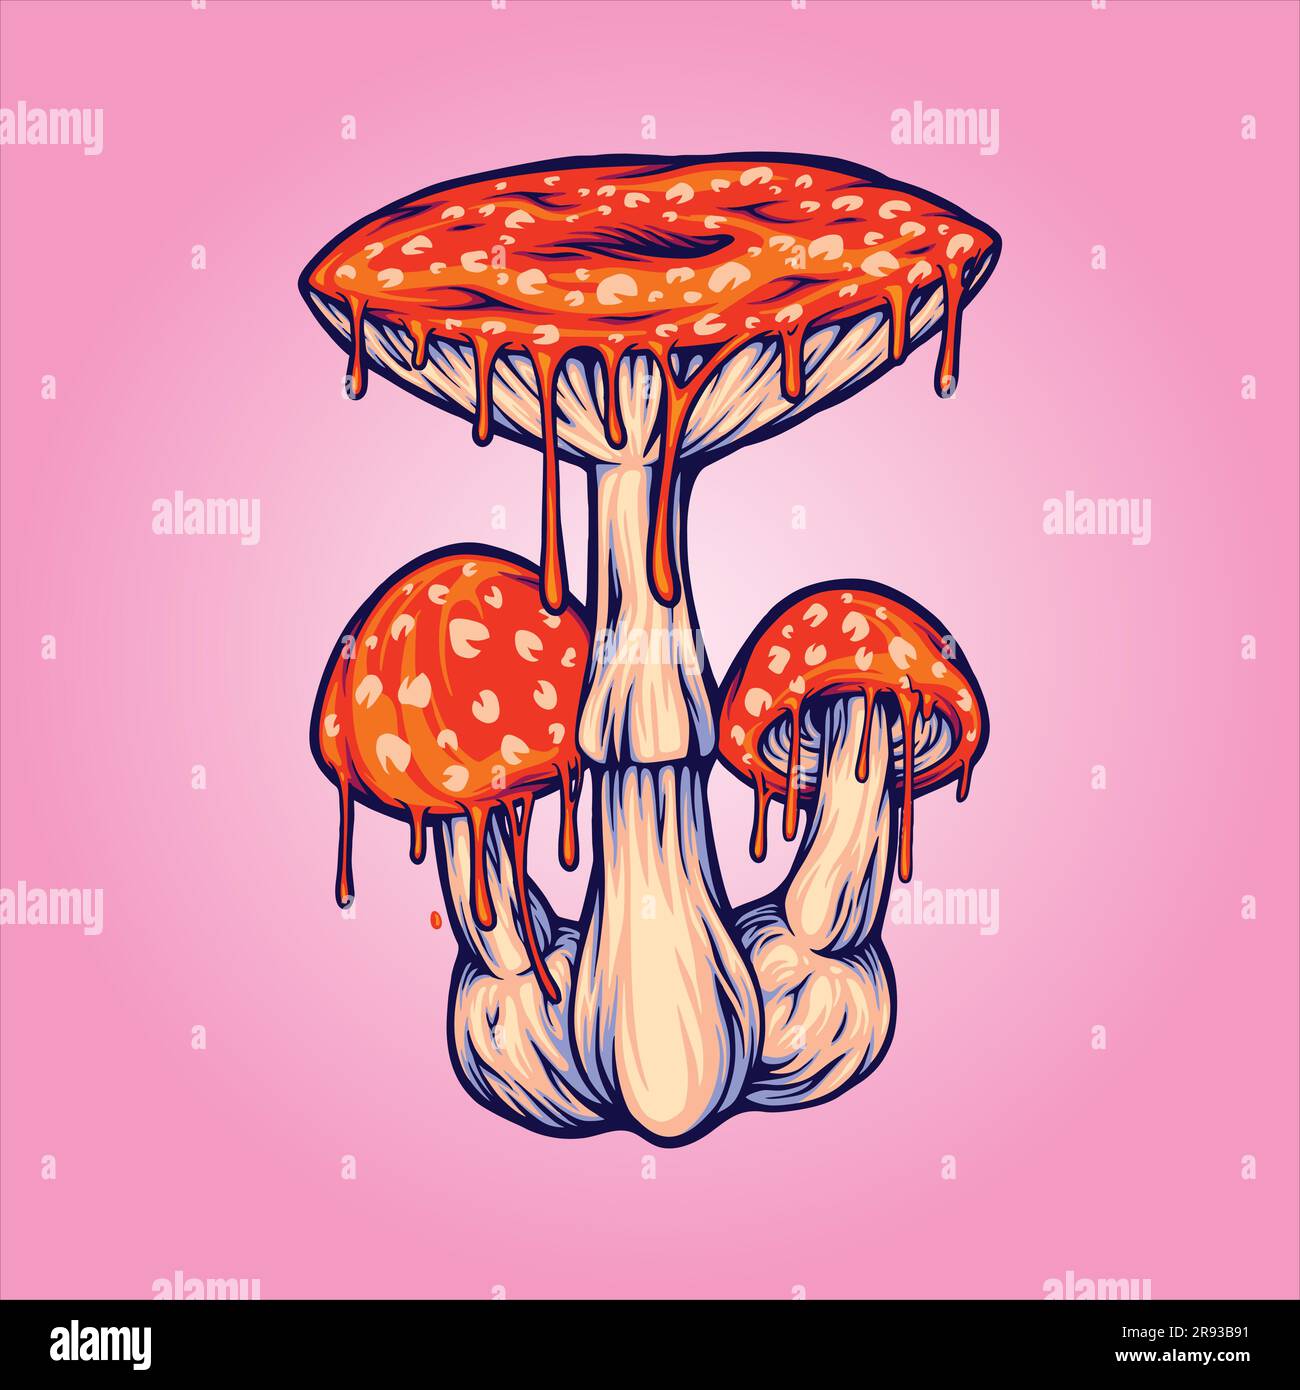 Melting fly amanita mushrooms hallucinogenic spore illustrations vector illustrations for your work logo, merchandise t-shirt, stickers and label desi Stock Vector